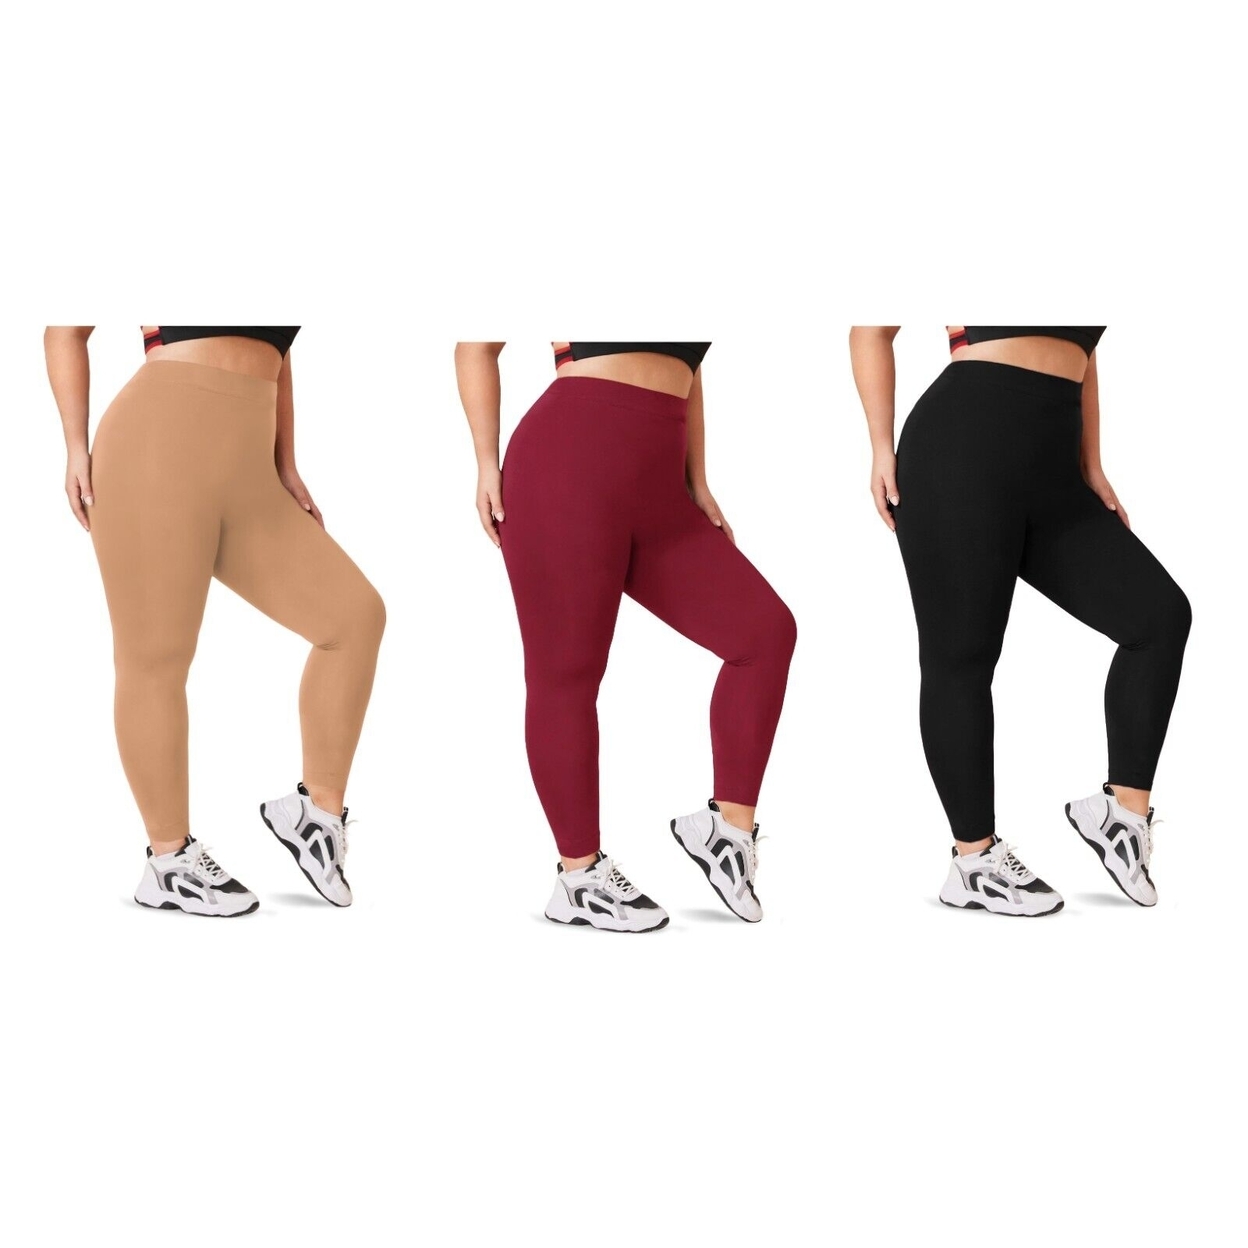 2-Pack: Women's Casual Ultra-Soft Smooth High Waisted Athletic Active Yoga Leggings Plus Size Available - Beige & Black, 4x